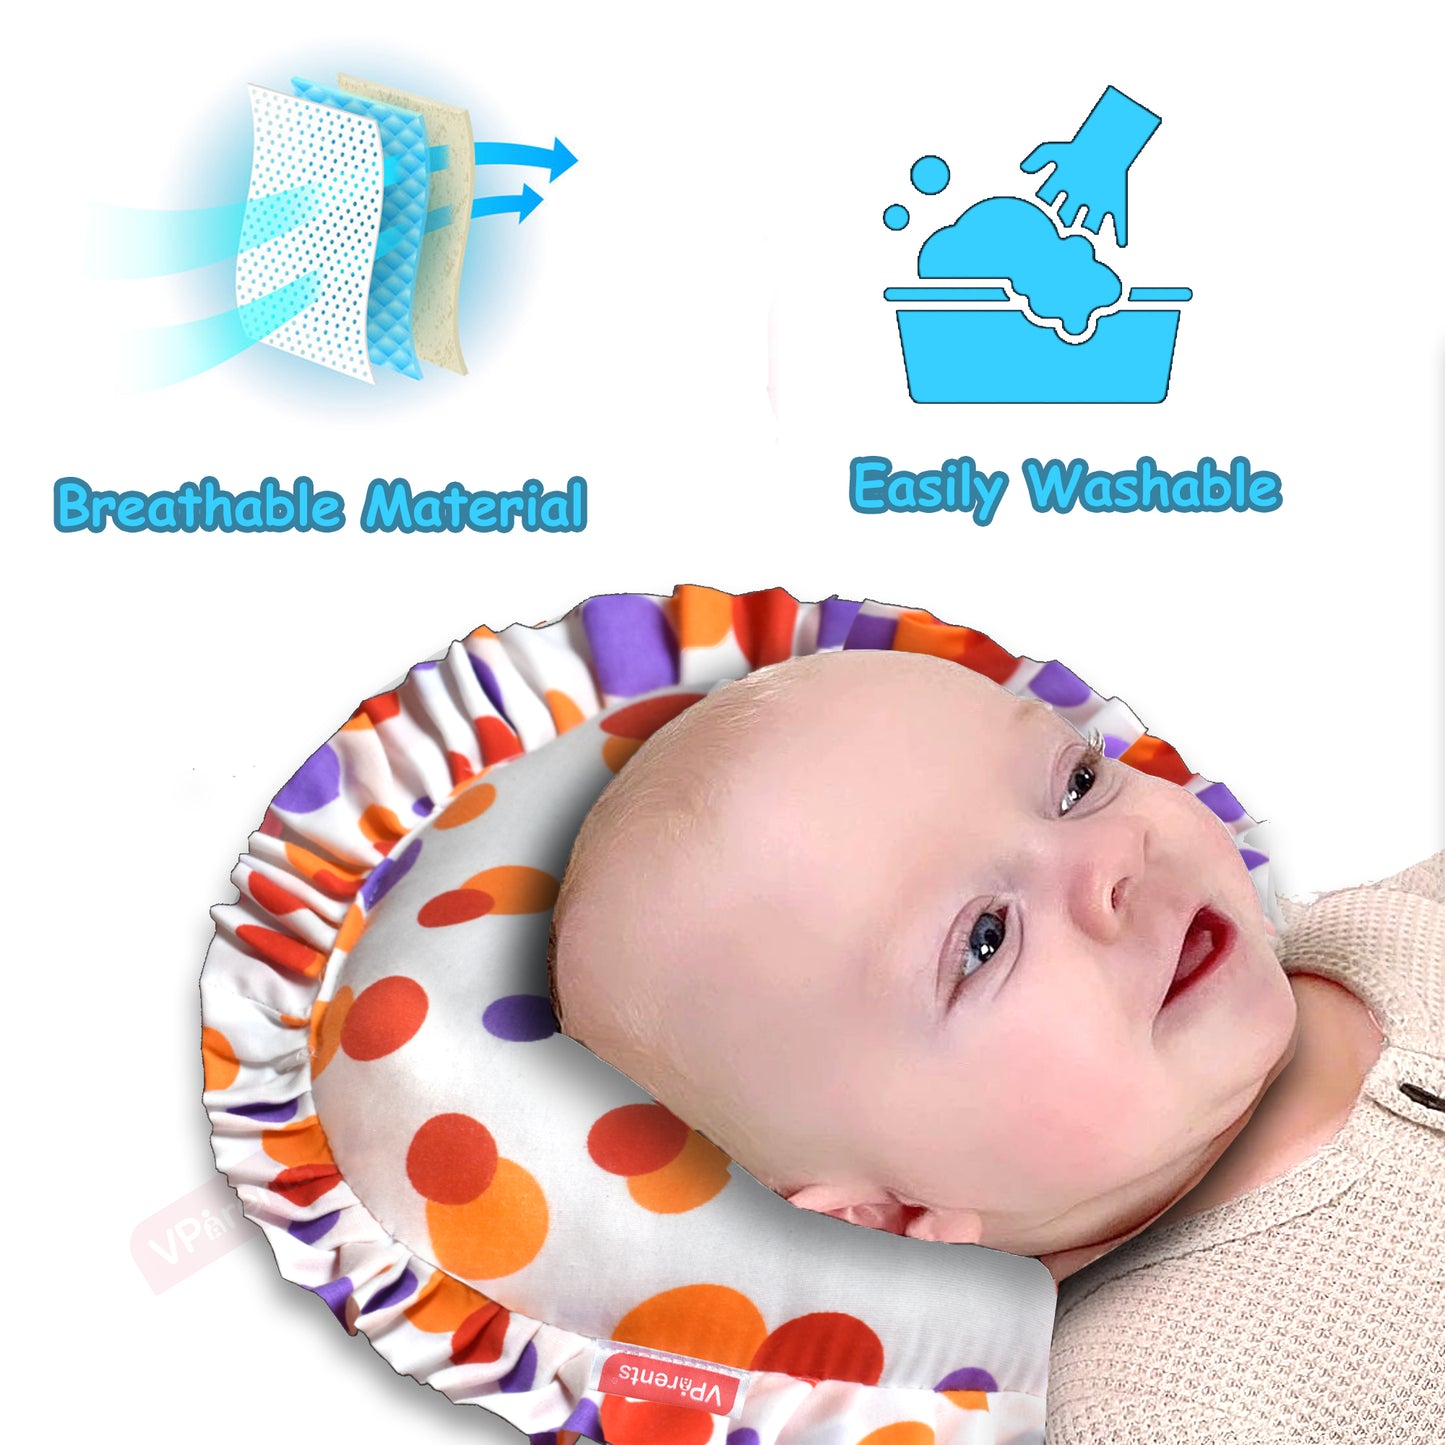 VParents preemie Neck Support Soft Pillow for New Born Baby U Shape Pillow